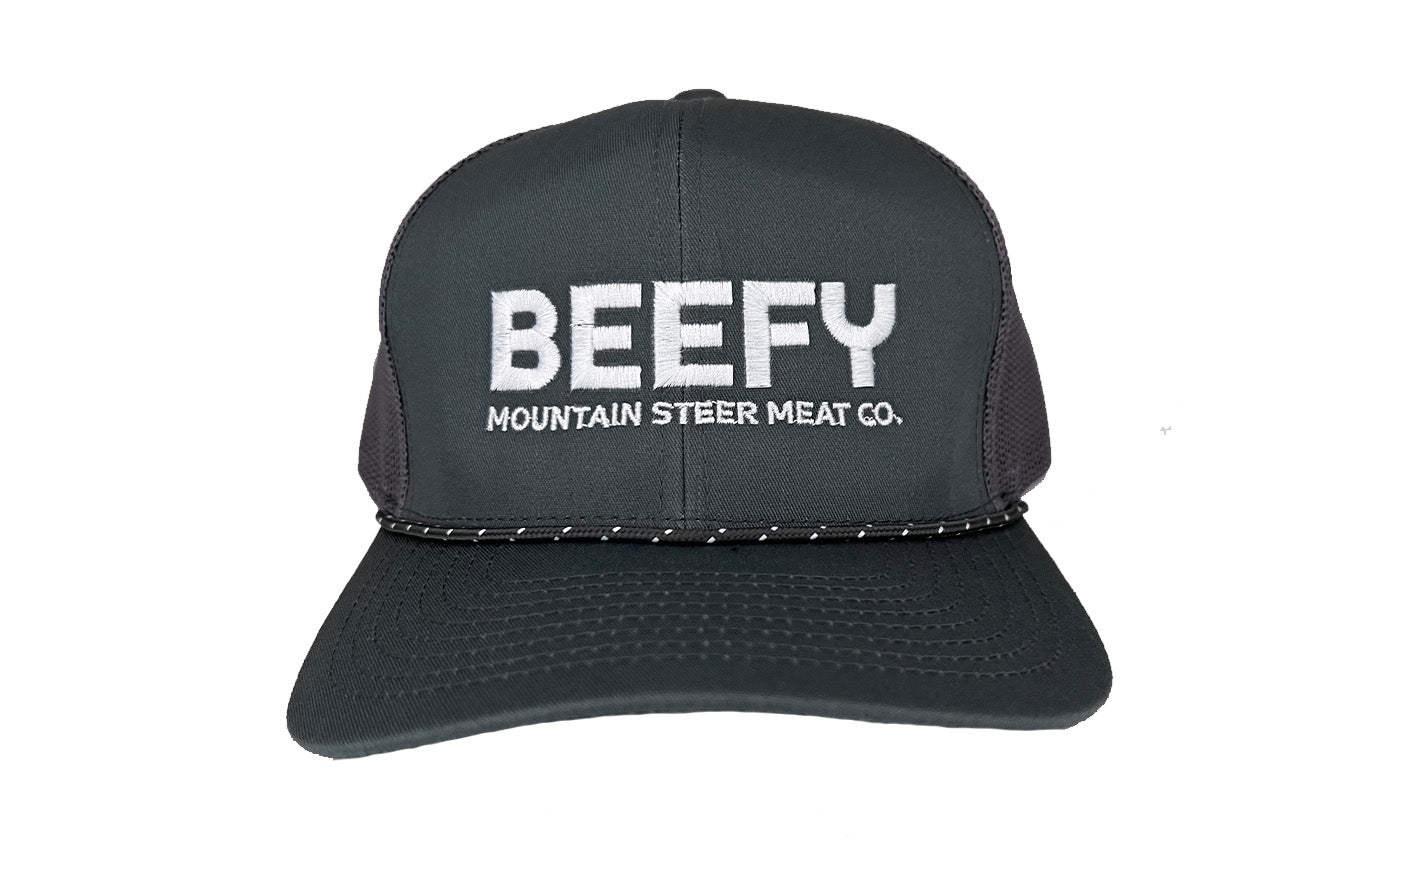 "Beefy" Mountain Steer Meat Co. Hat - Grey & White